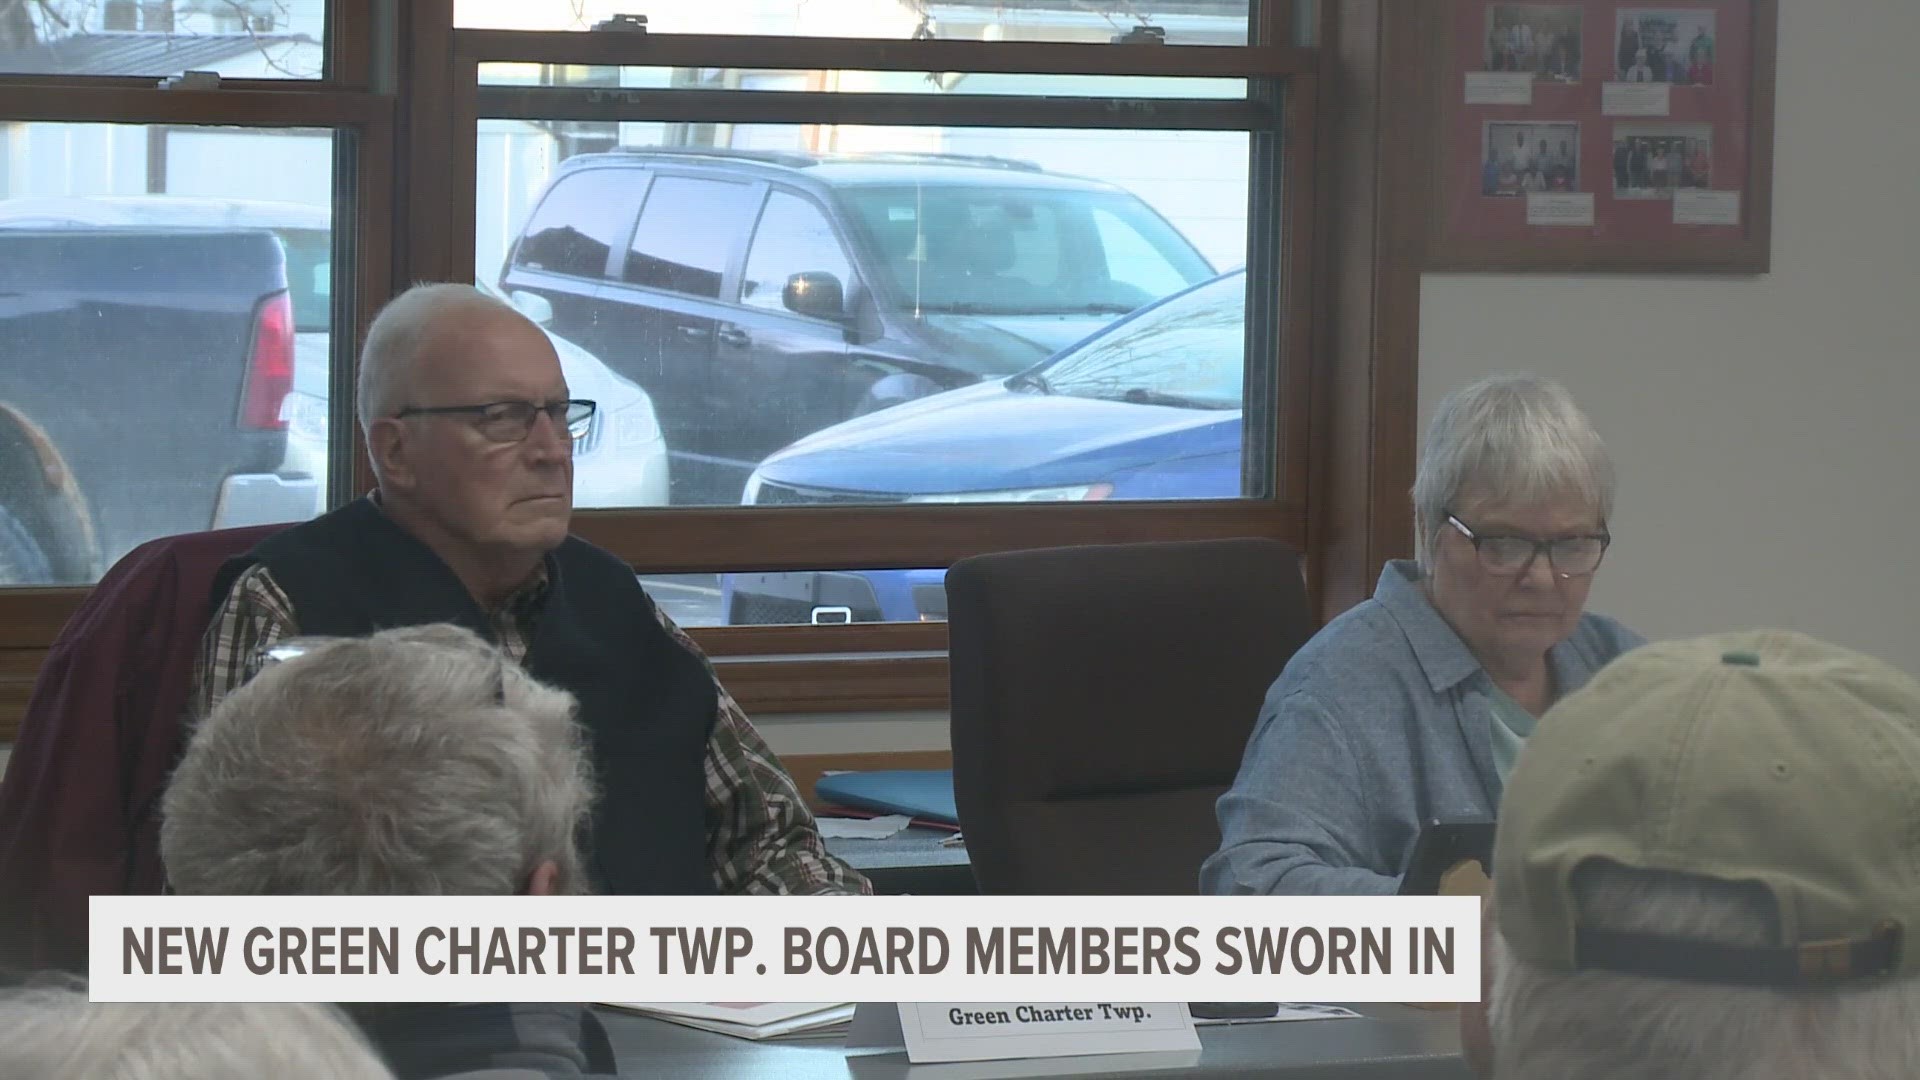 New members of the Green Charter Township board have been sworn in.